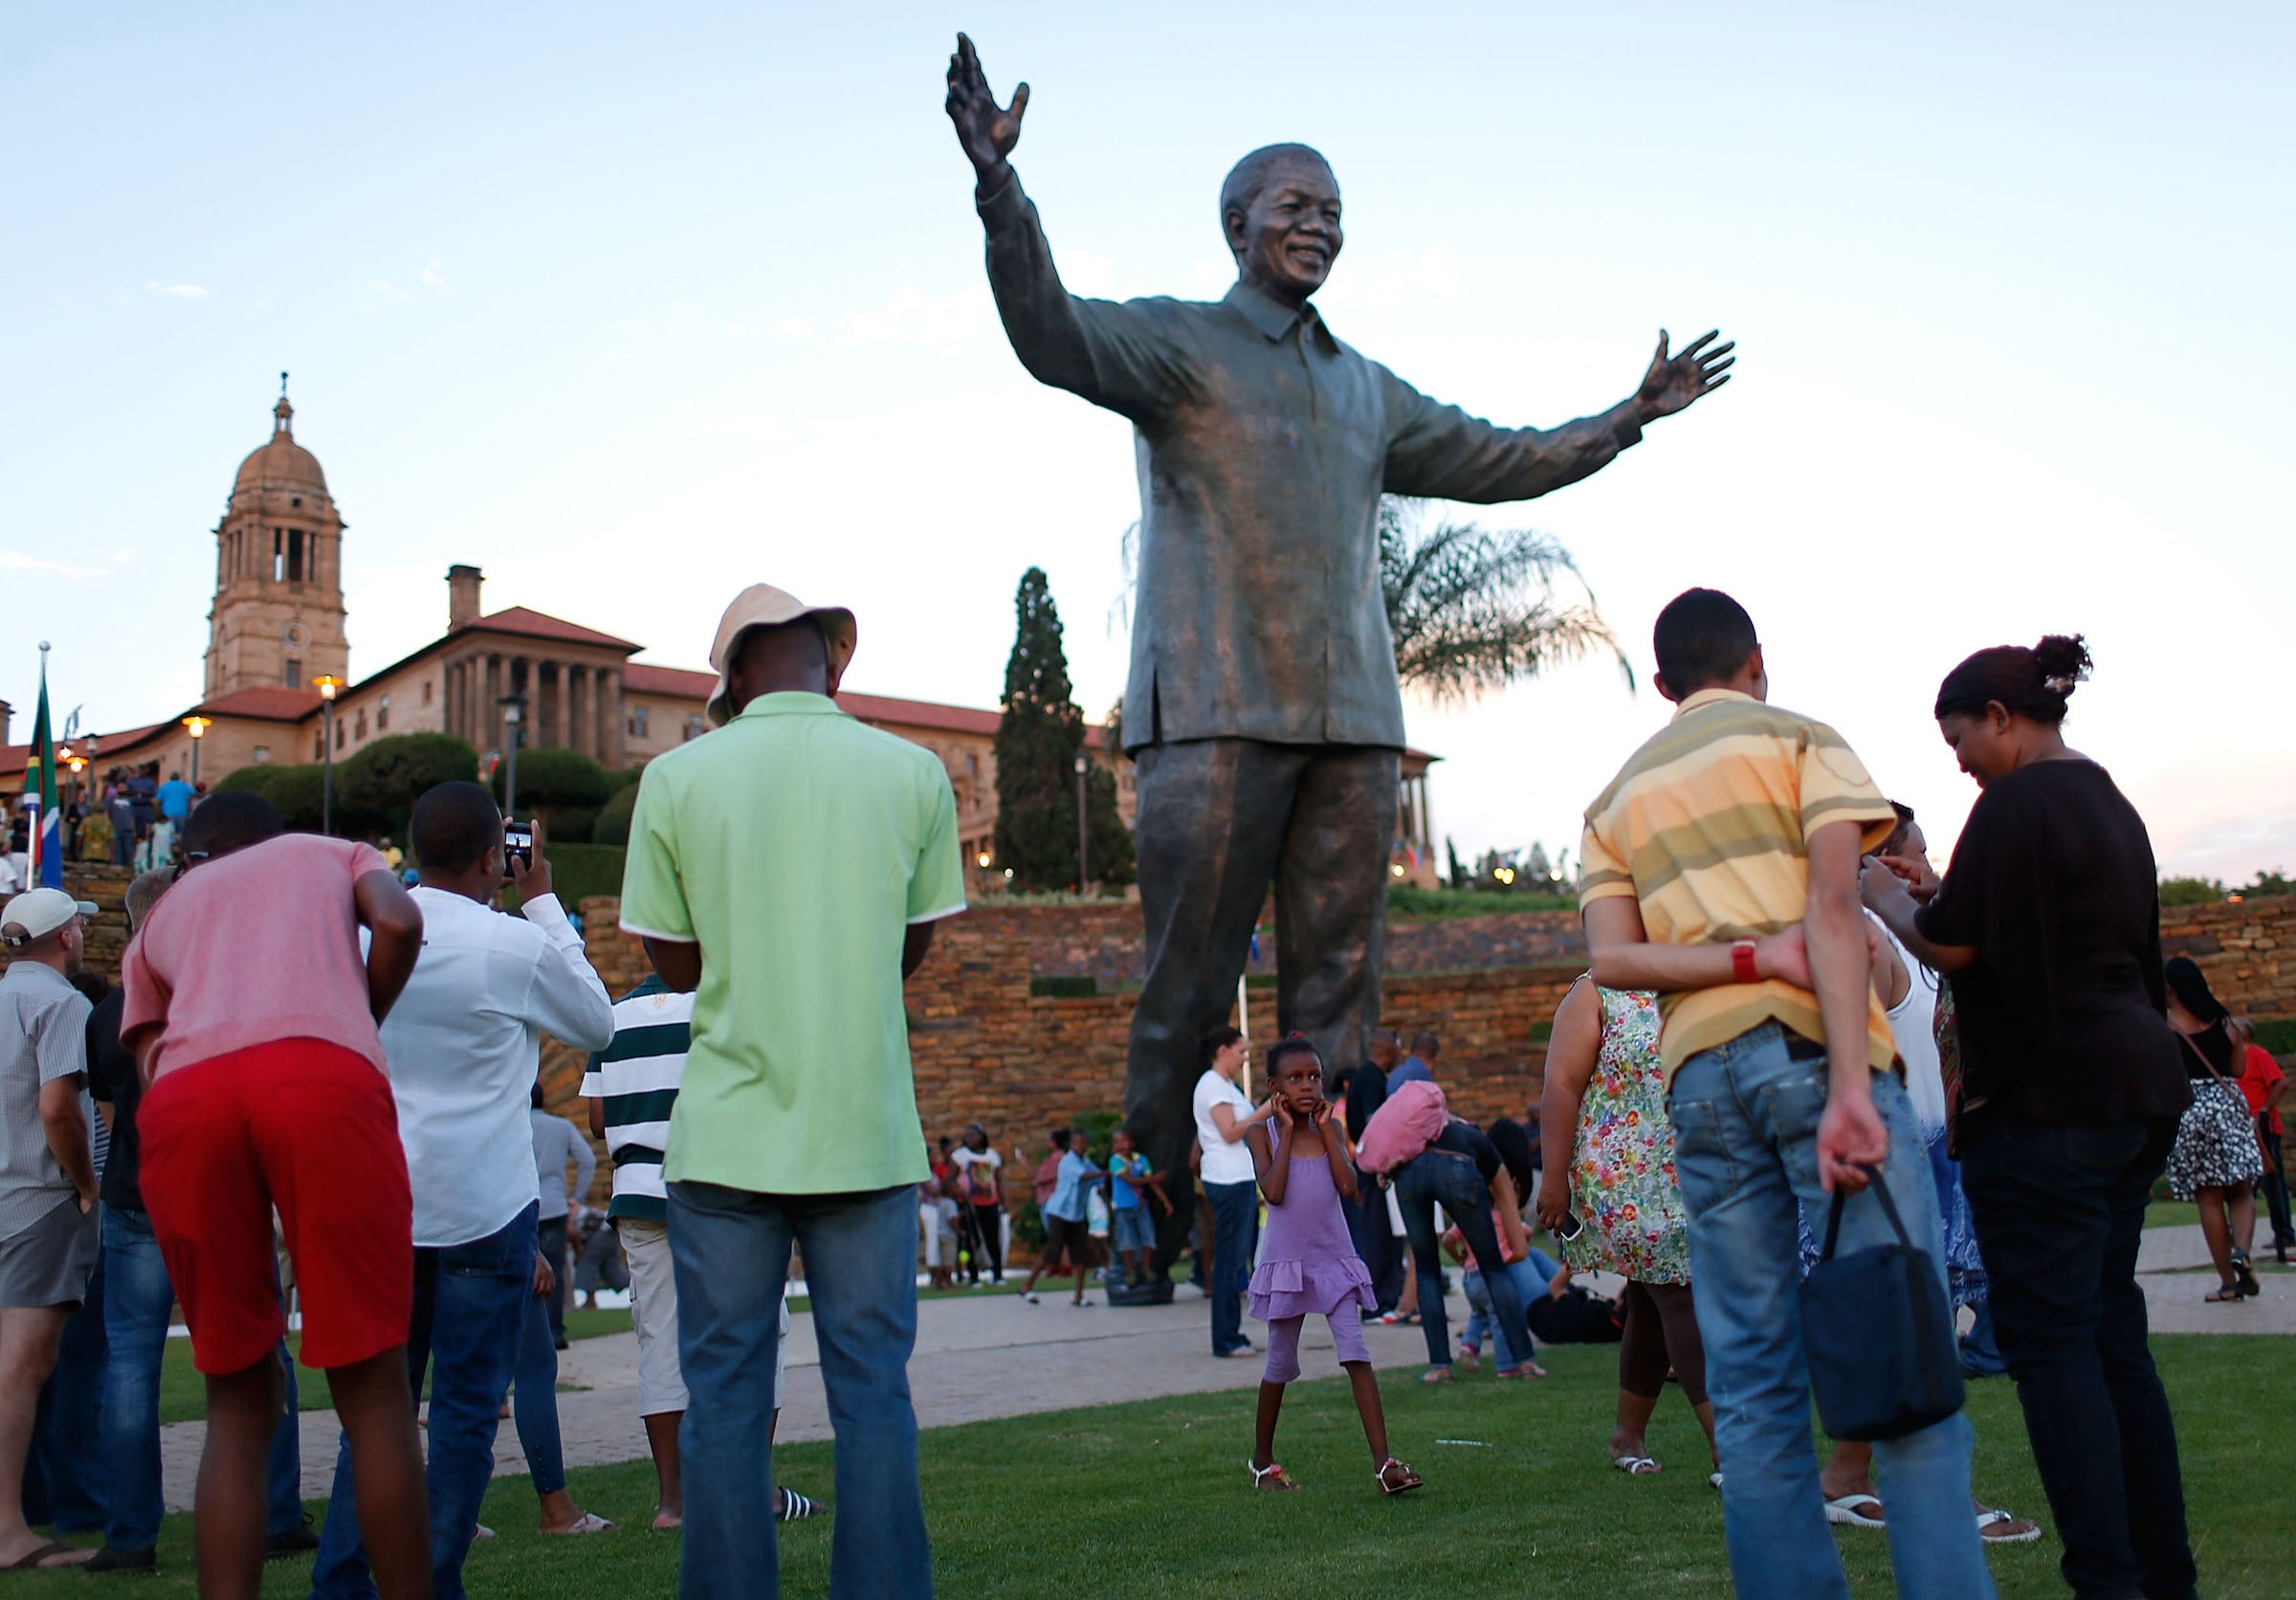 While Nelson Mandela is still revered in the West, his legacy is regarded more harshly in South Africa